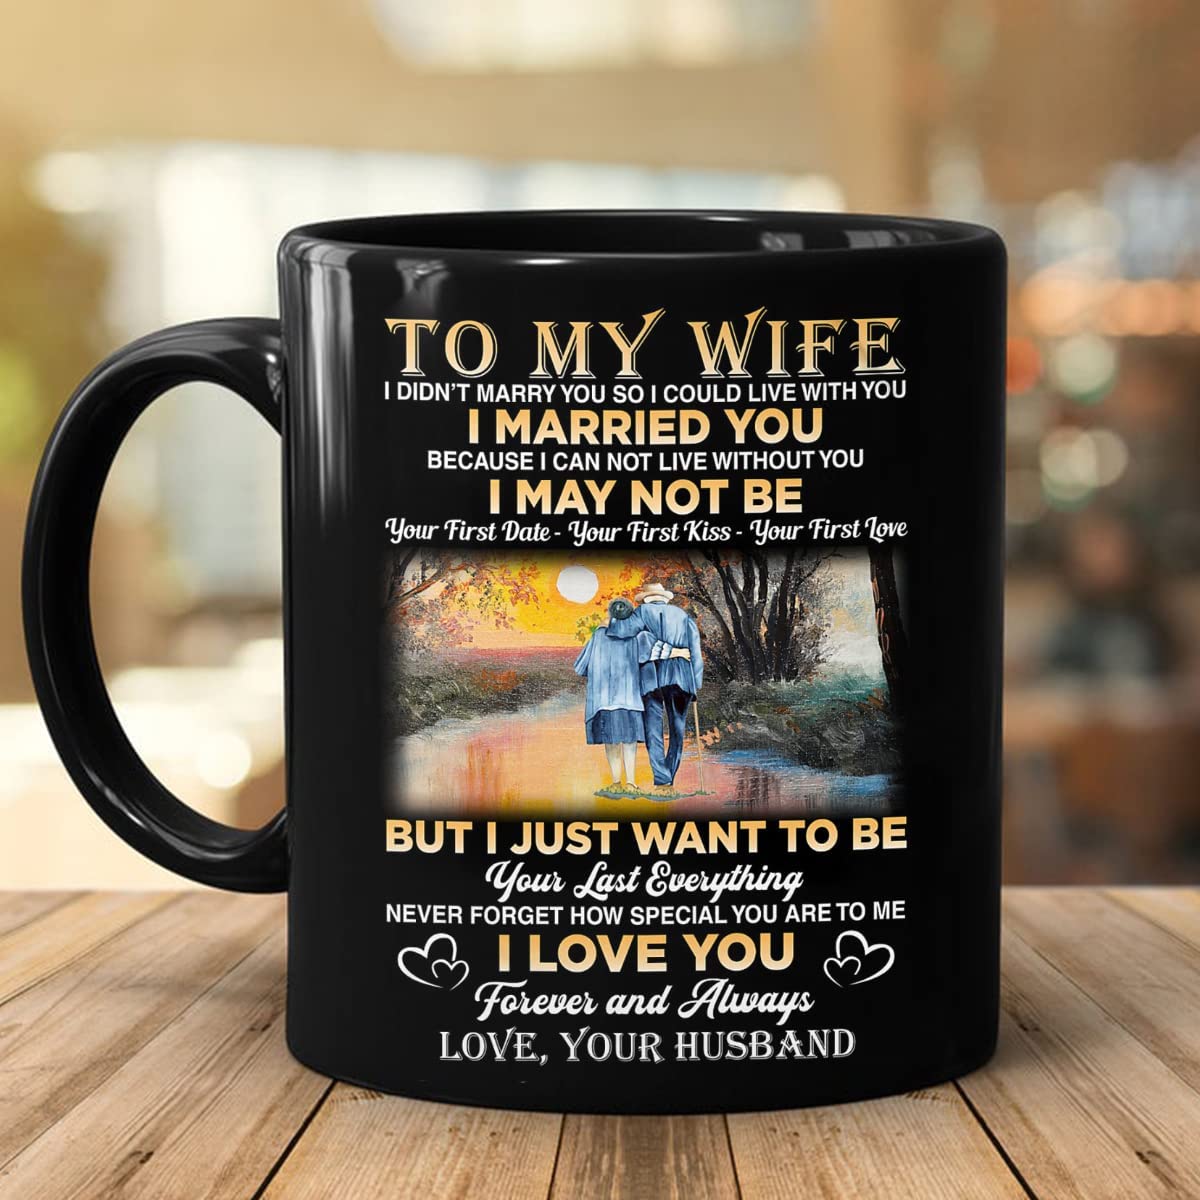 Accent, To My Wife From Husband Mug – For Couple on Anniversary (Black)